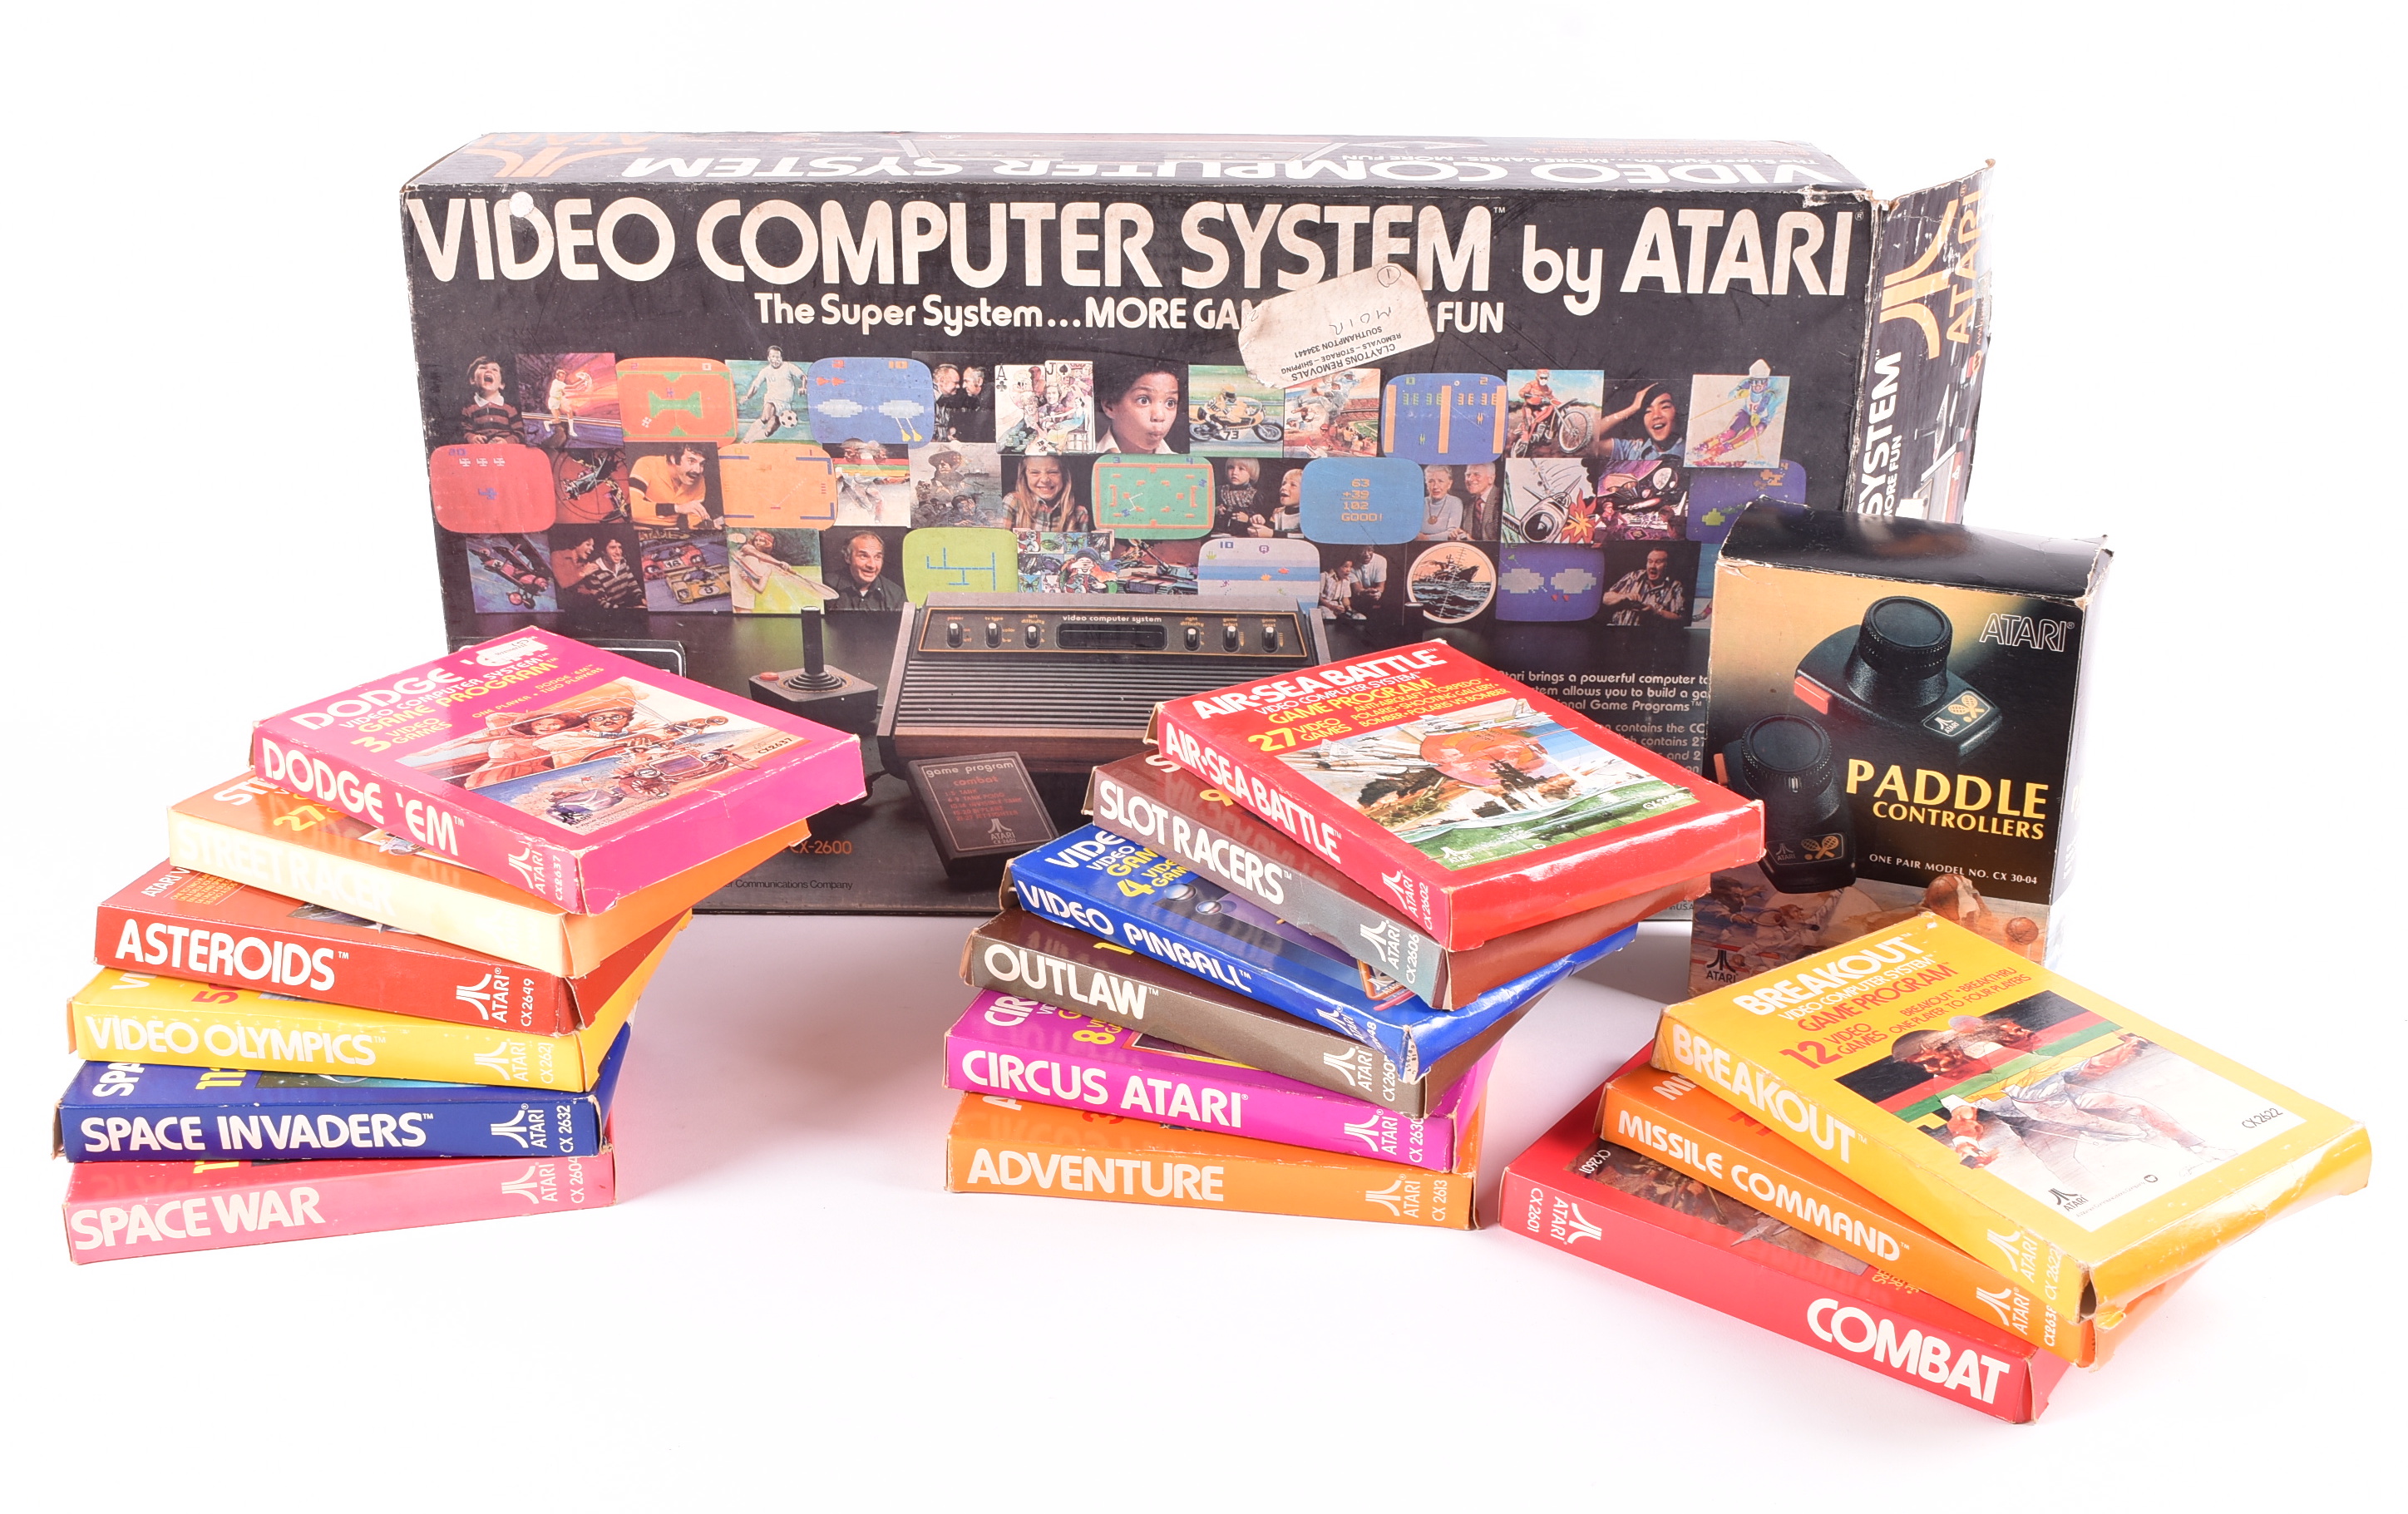 An early Atari 2600 'VCS' Video Computer System, with games and accessories - £165